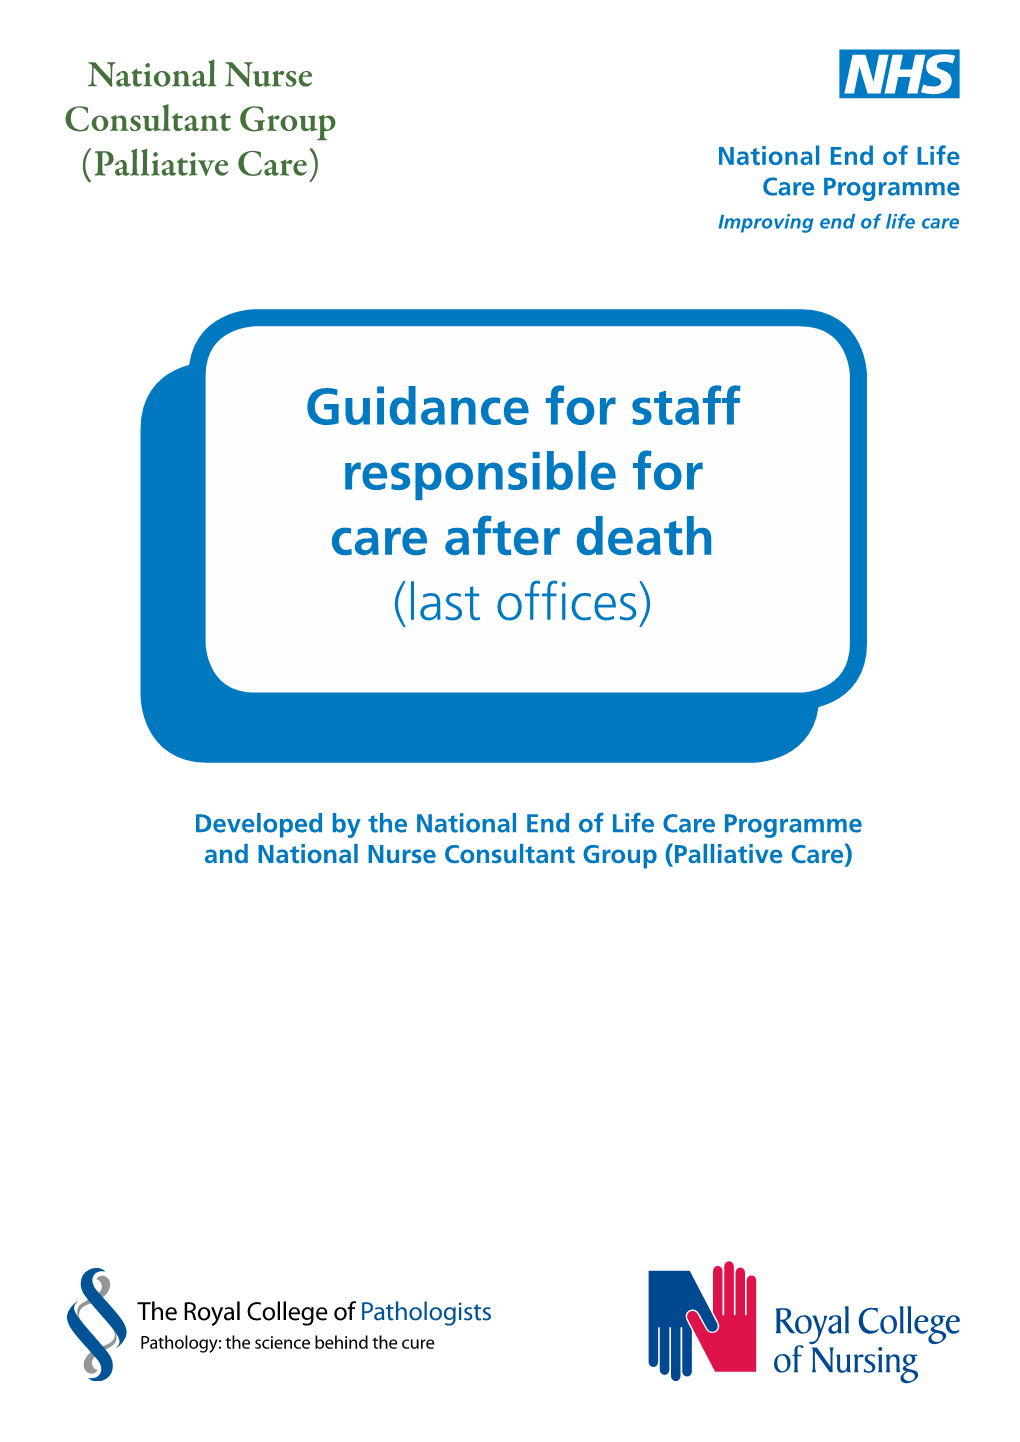 Guidance for Staff Responsible for Care After Death (Last Offices)